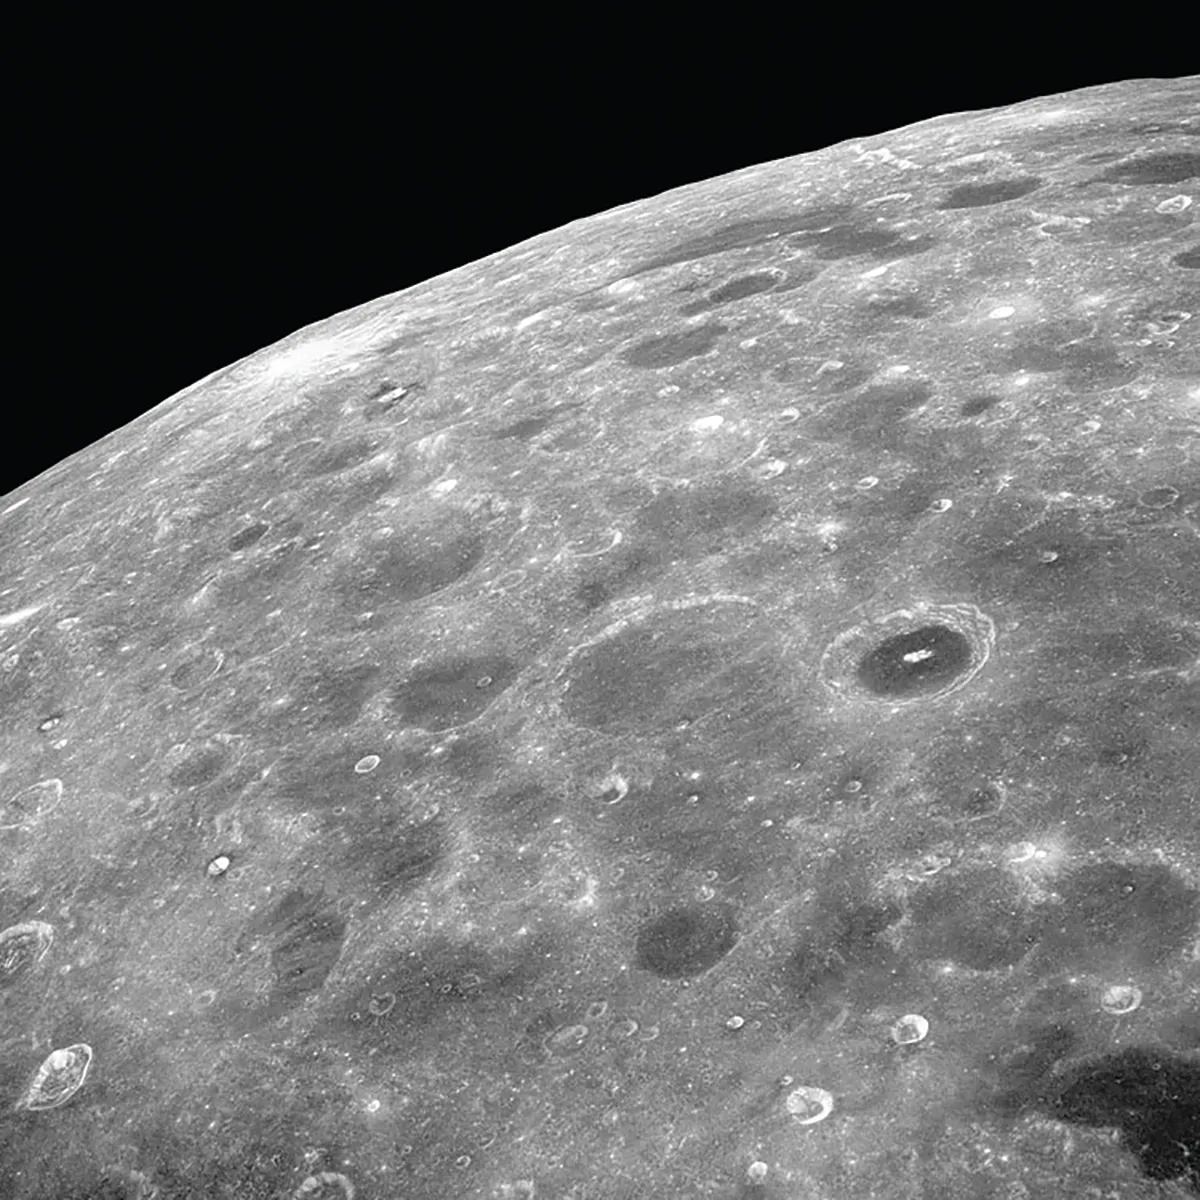 The far side of the Moon, as seen by the Apollo 8 astronauts during their epic mission. Credit: NASA